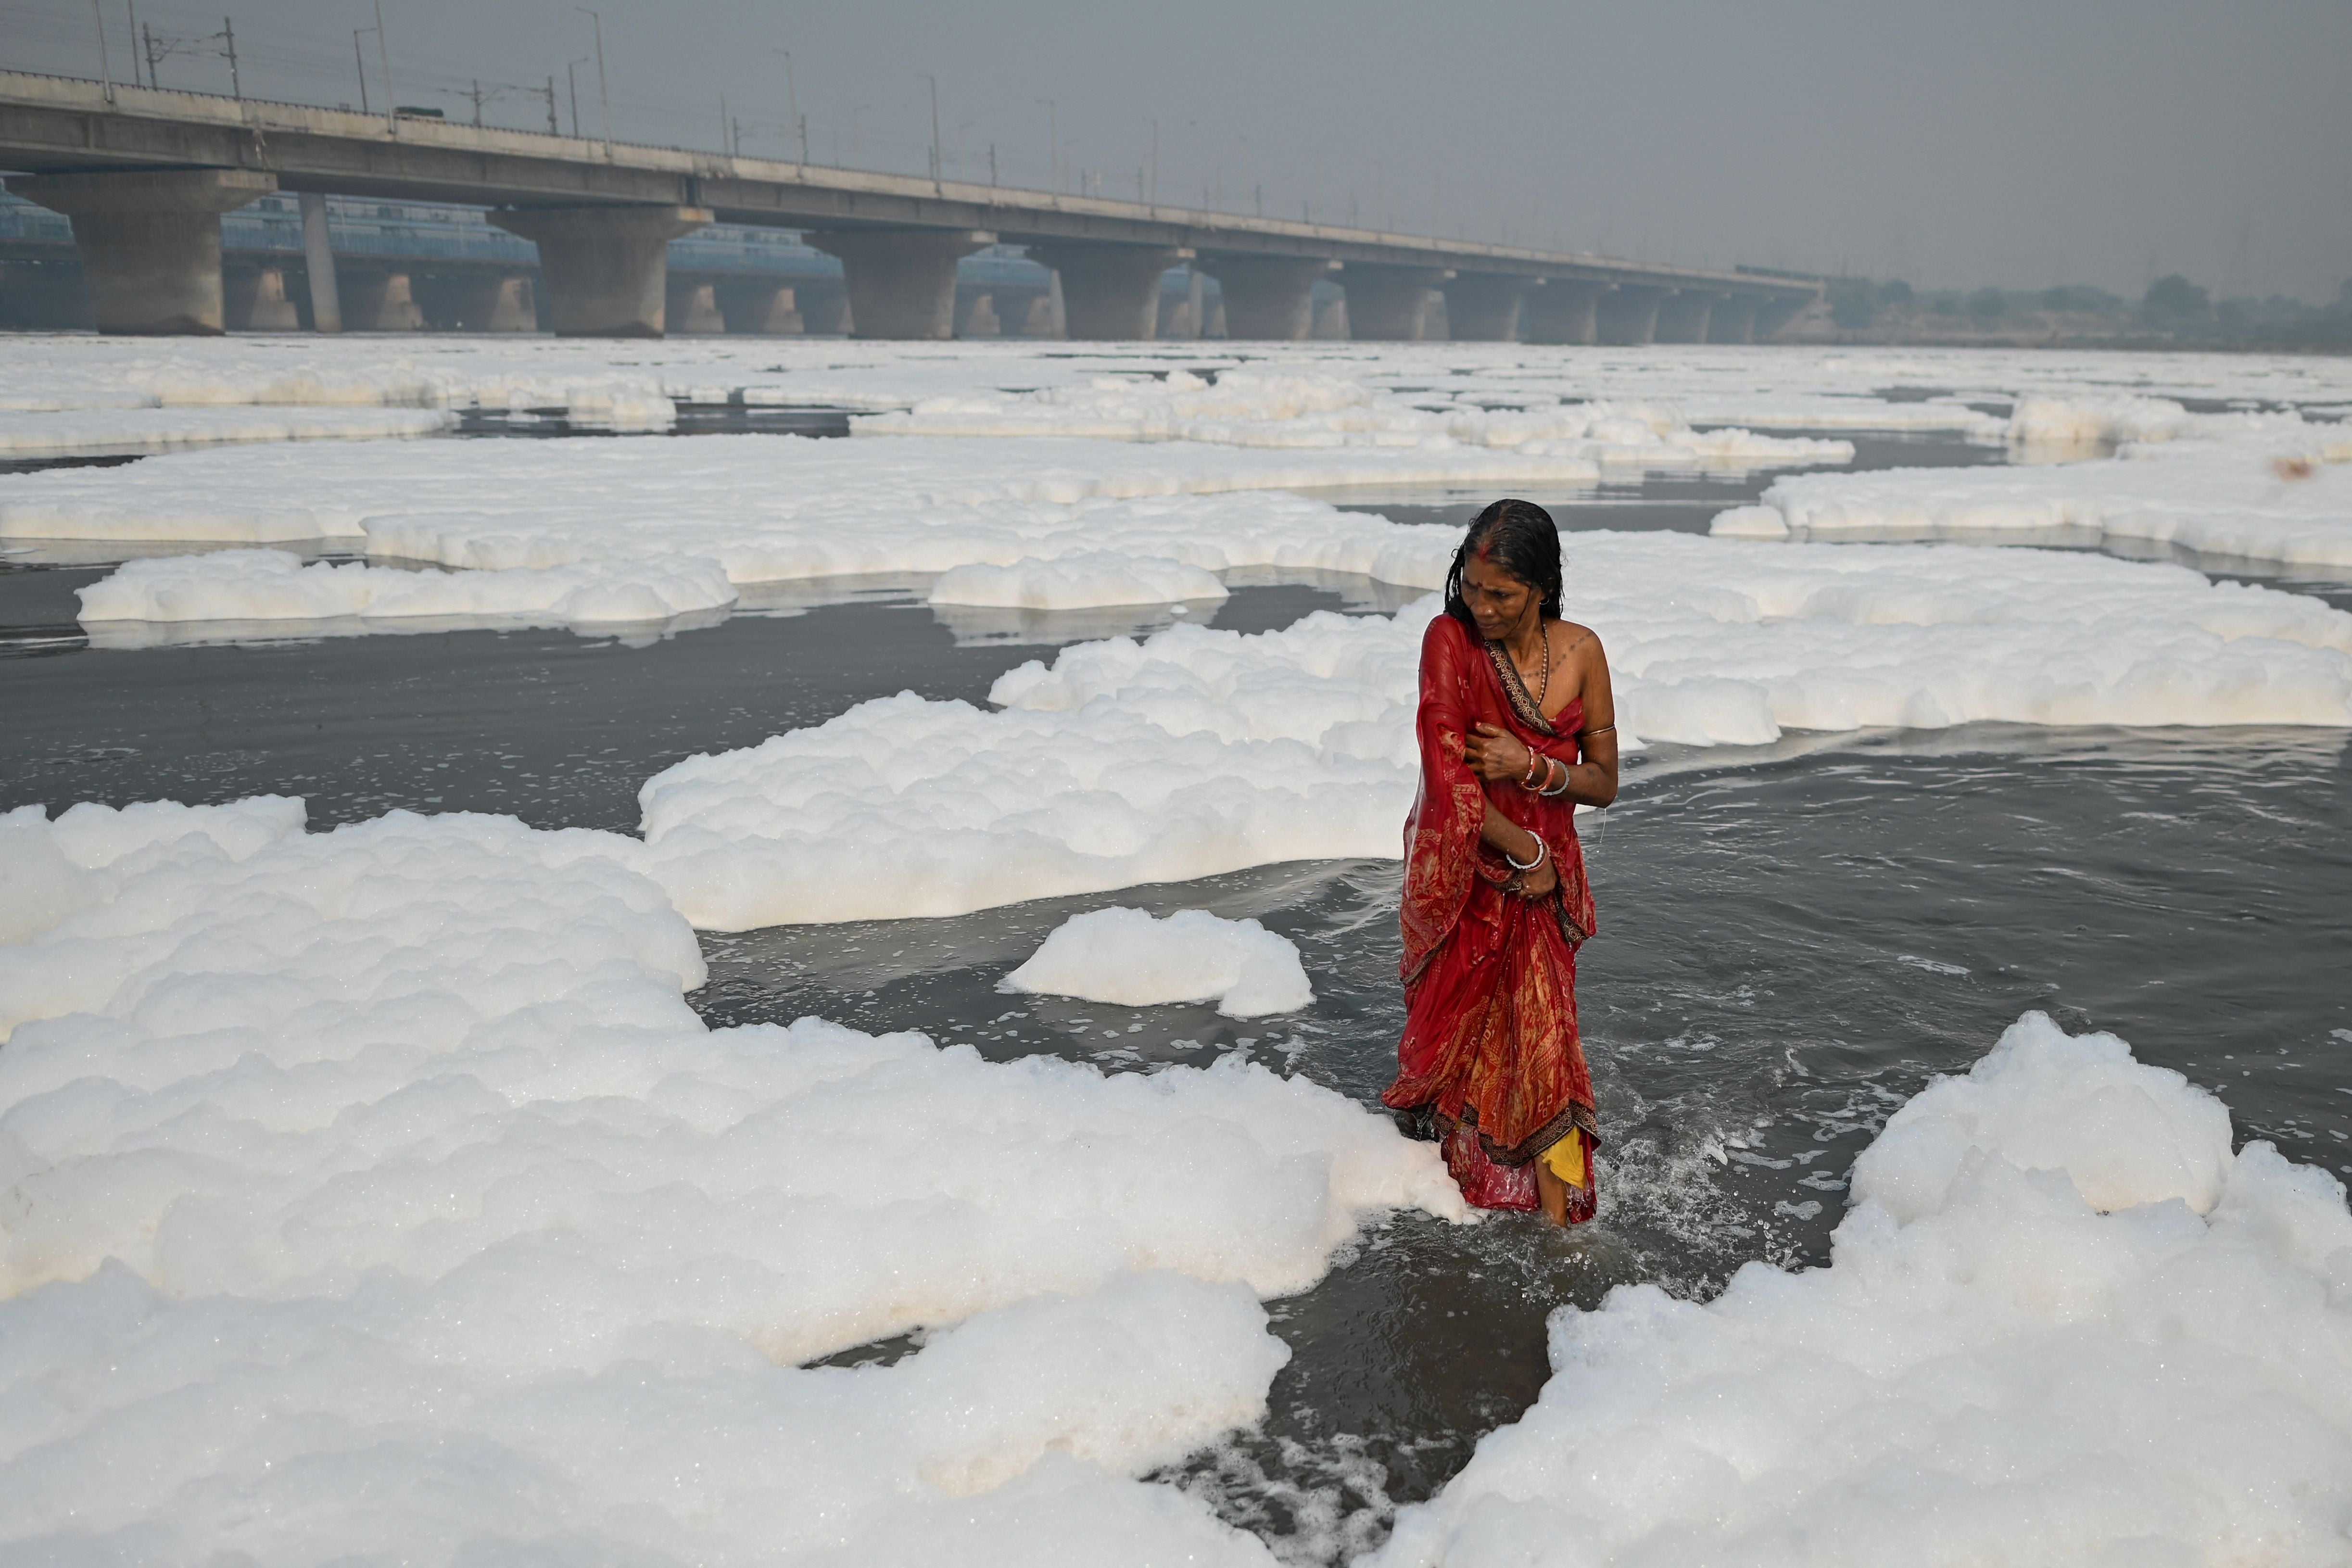 A devotee stands by foam in the Yamuna river as part of rituals for the festival of Chhath